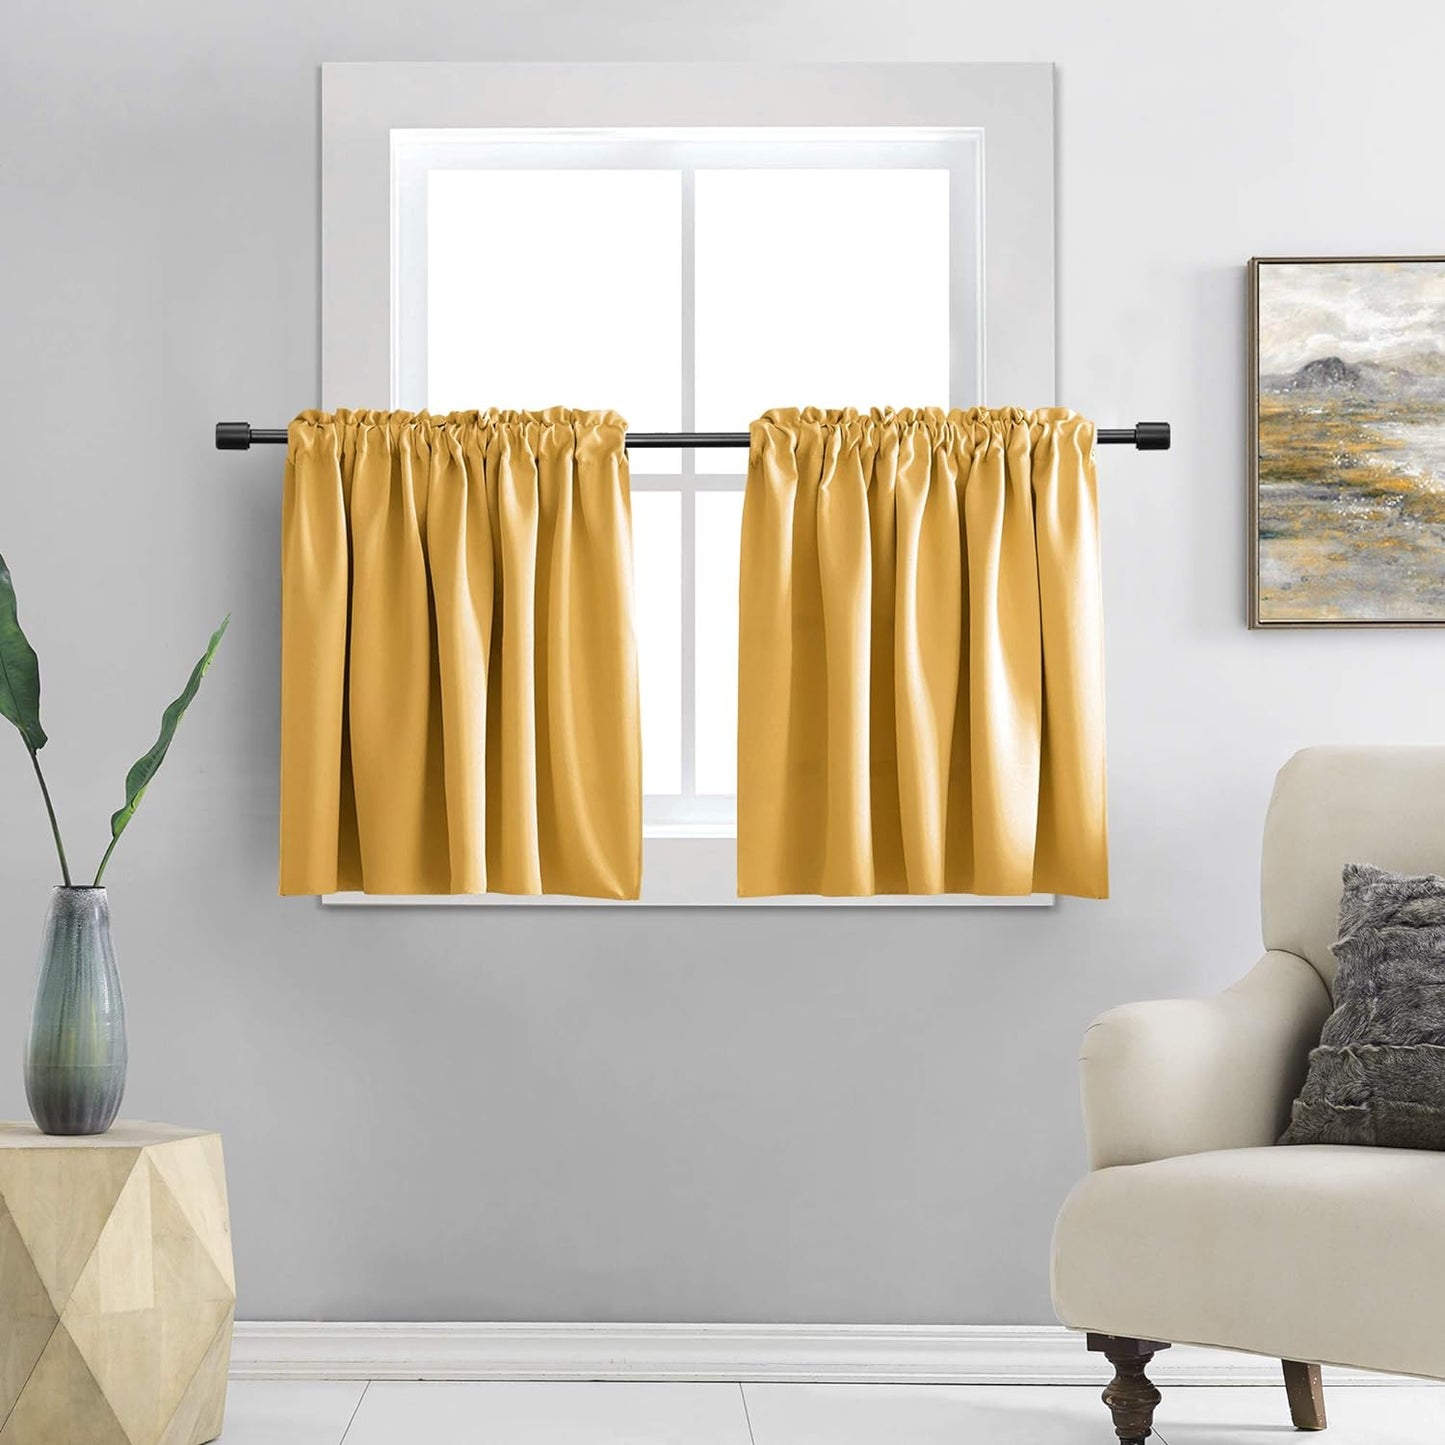 DONREN 24 Inch Length Curtains- 2 Panels Blackout Thermal Insulating Small Curtain Tiers for Bathroom with Rod Pocket (Black,42 Inch Width)  DONREN Gold Yellow 42" X 24" 